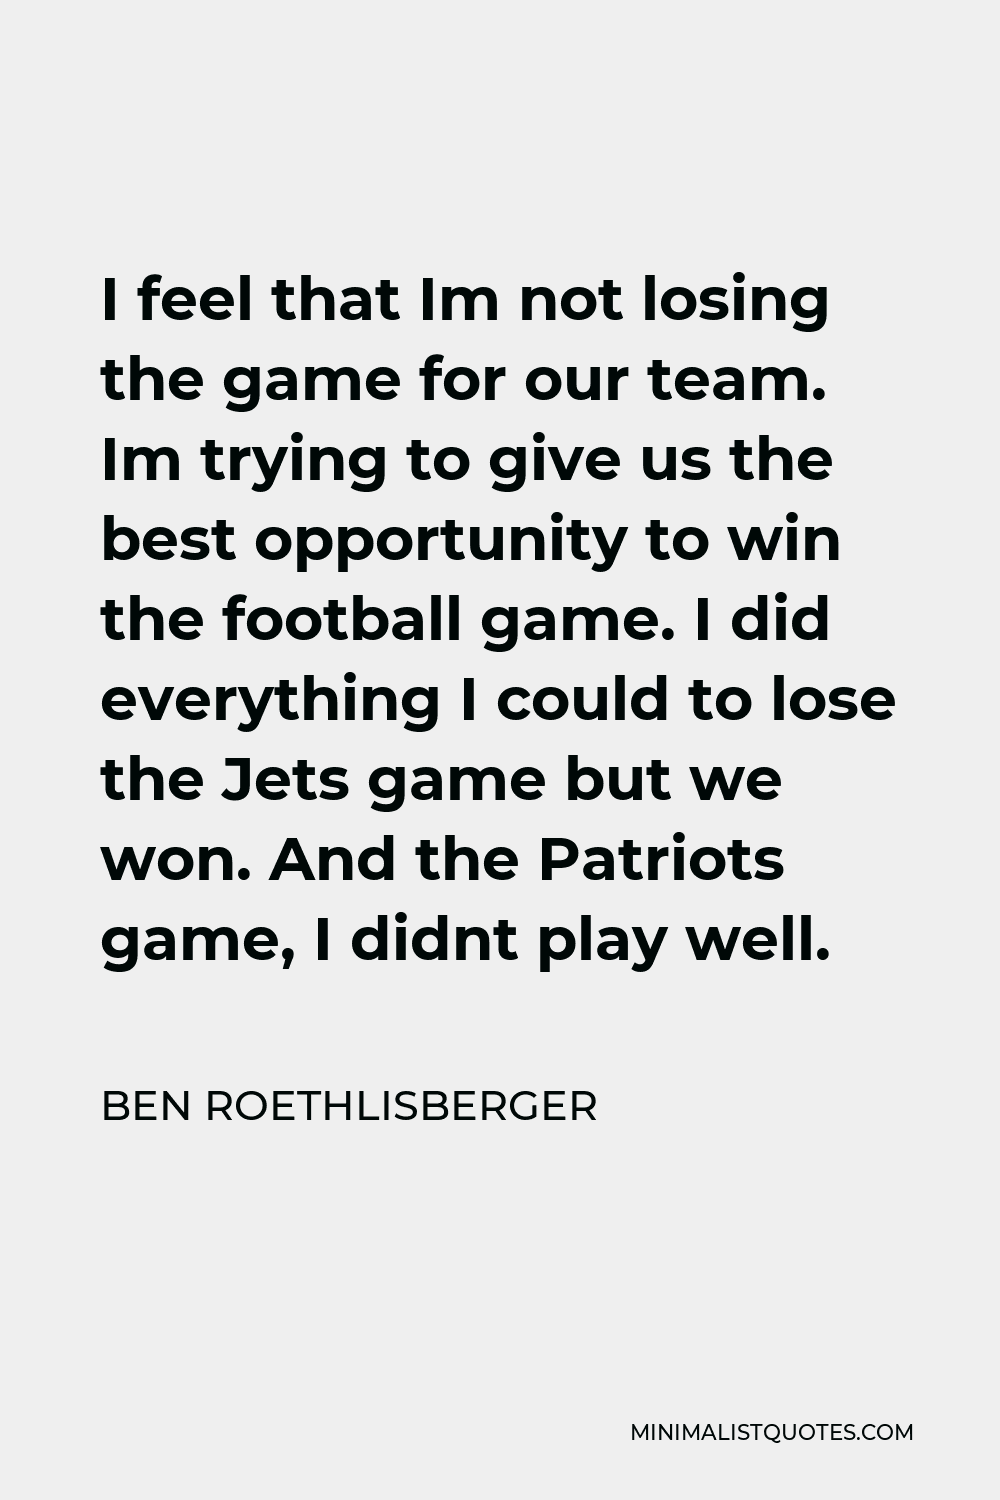 Ben Roethlisberger Quote - I feel that Im not losing the game for our team. Im trying to give us the best opportunity to win the football game. I did everything I could to lose the Jets game but we won. And the Patriots game, I didnt play well.